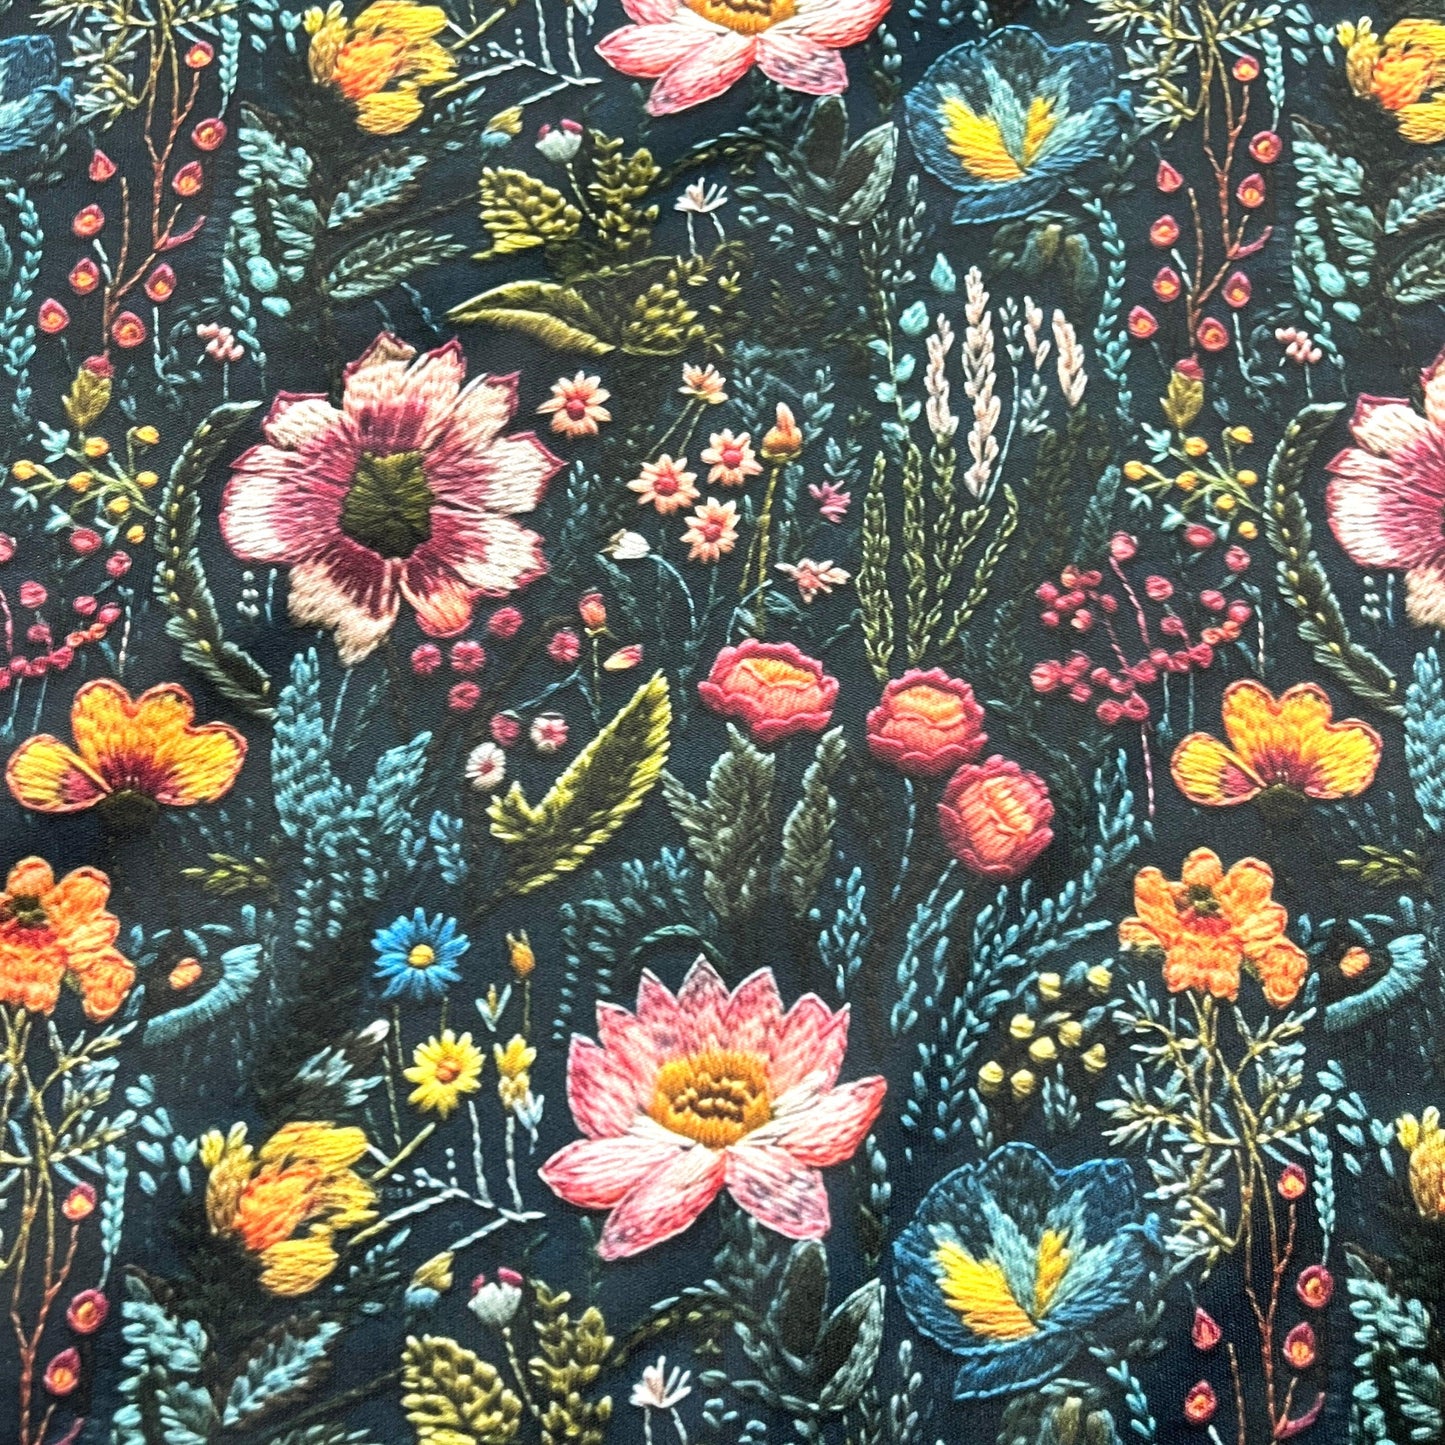 Embroidered Flower Garden 1 mil PUL Fabric - Made in the USA - Nature's Fabrics